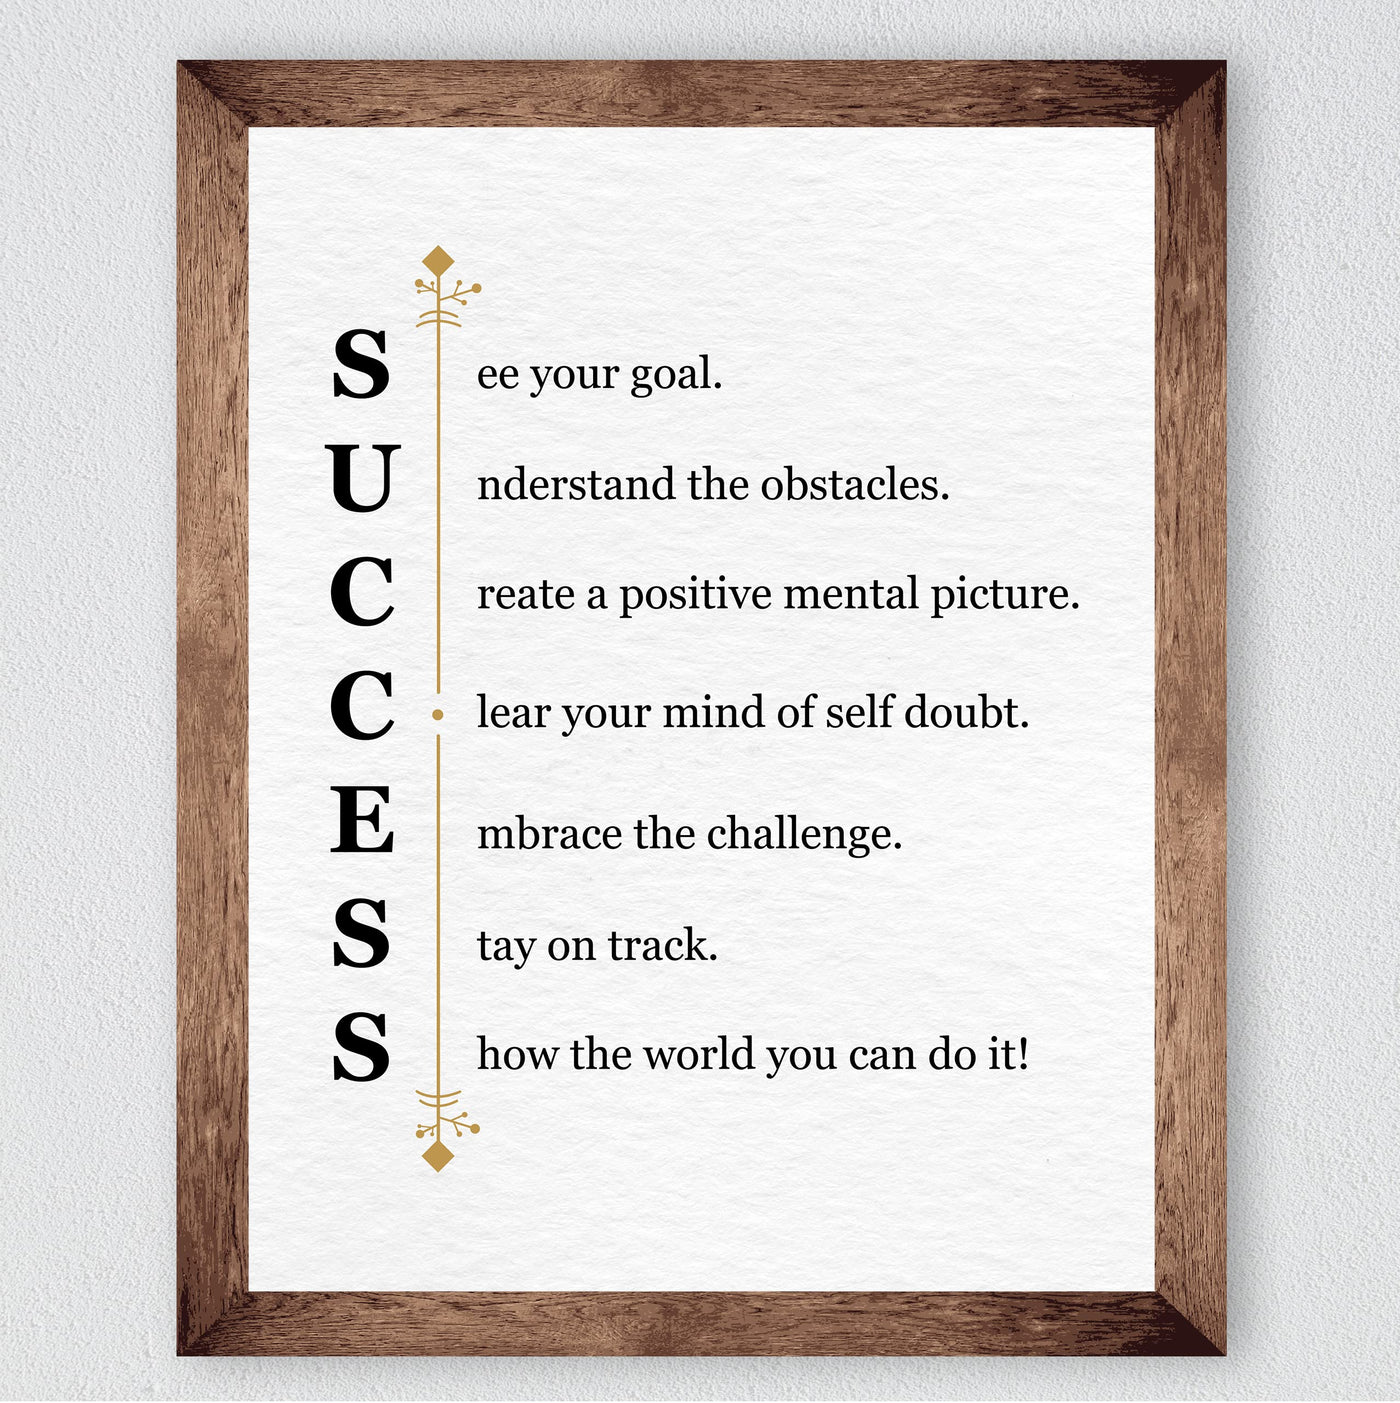 "Success -See Your Goal"-Motivational Quotes Wall Art Sign -11 x 14" Modern Typographic Picture Print -Ready to Frame. Inspirational Home-Office-Classroom-Work Decor. Great Gift of Motivation!